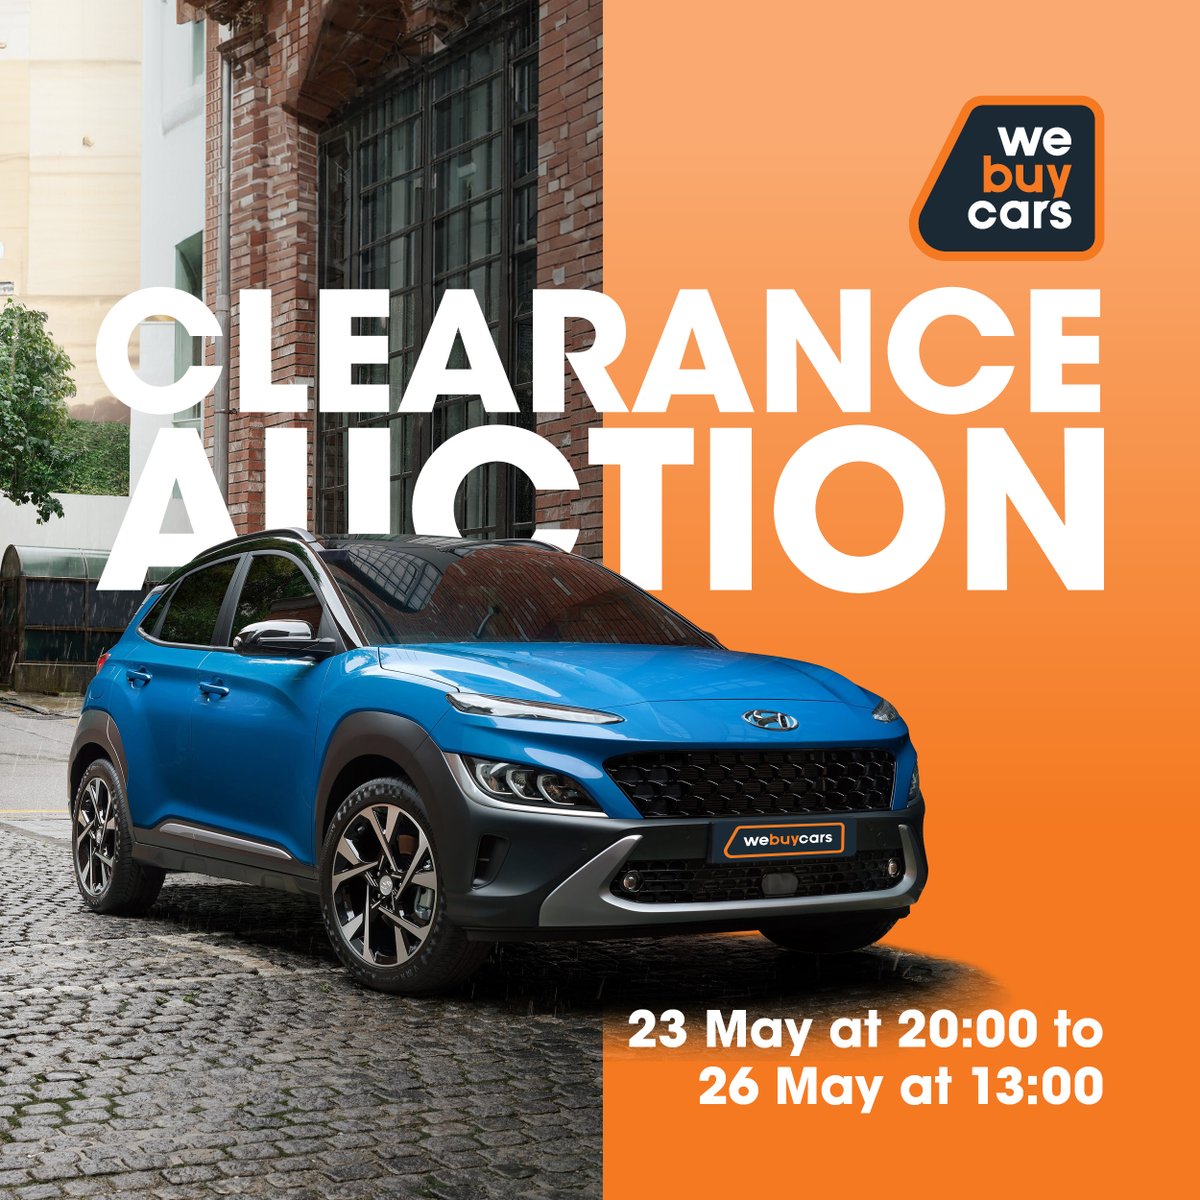 It's that time again... Bid in our Clearance Auction this week and get an amazing deal that suits your budget 🙌

#carsforsale #preownedcars #usedcars #usedcarsforsale #carshopping #carfinance #autosales #carsales #carlifestyle #auction #webuycars